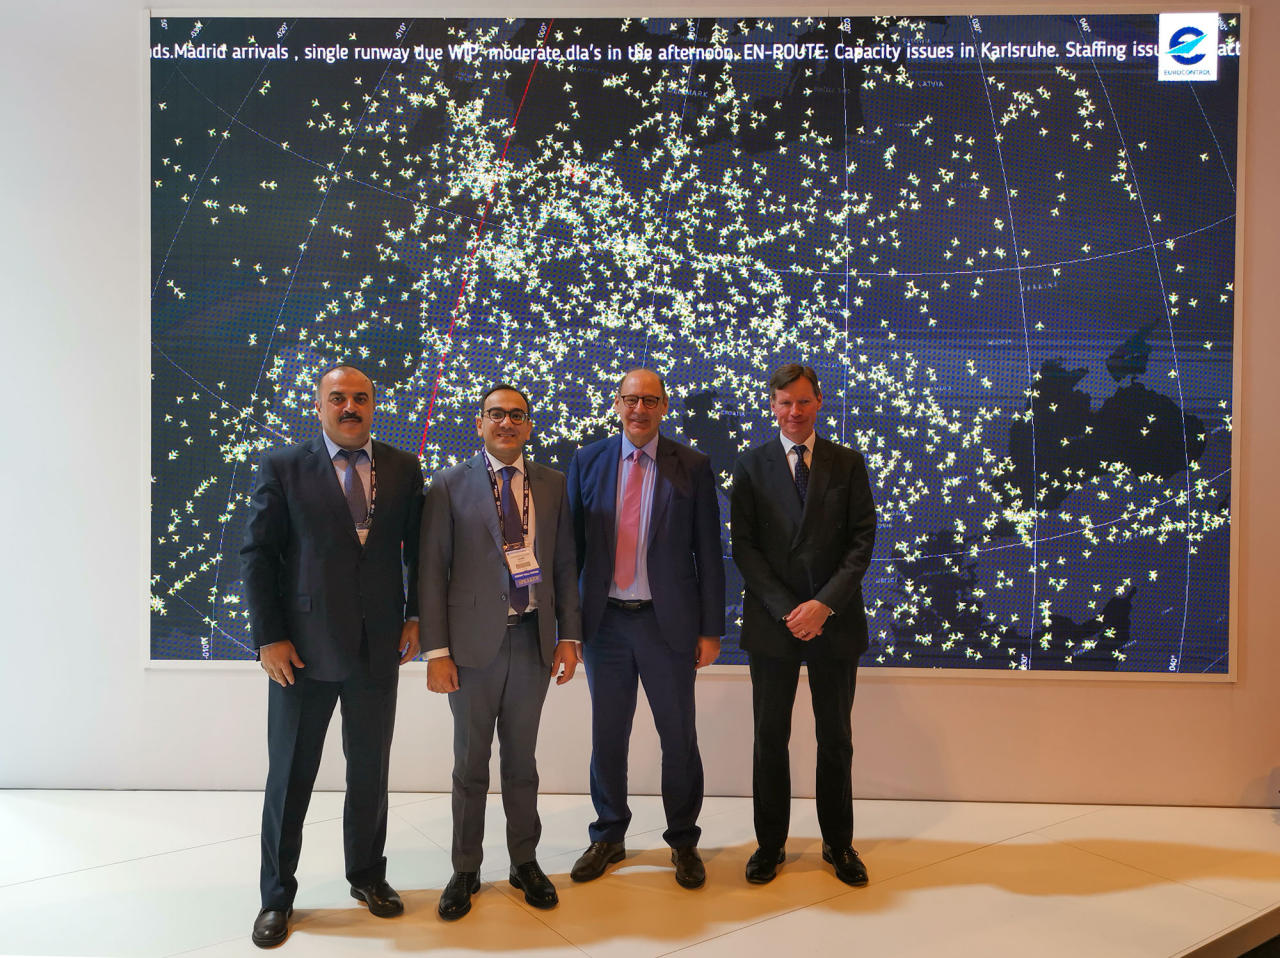 AZANS and EUROCONTROL met in the framework of World ATM Congress 2019